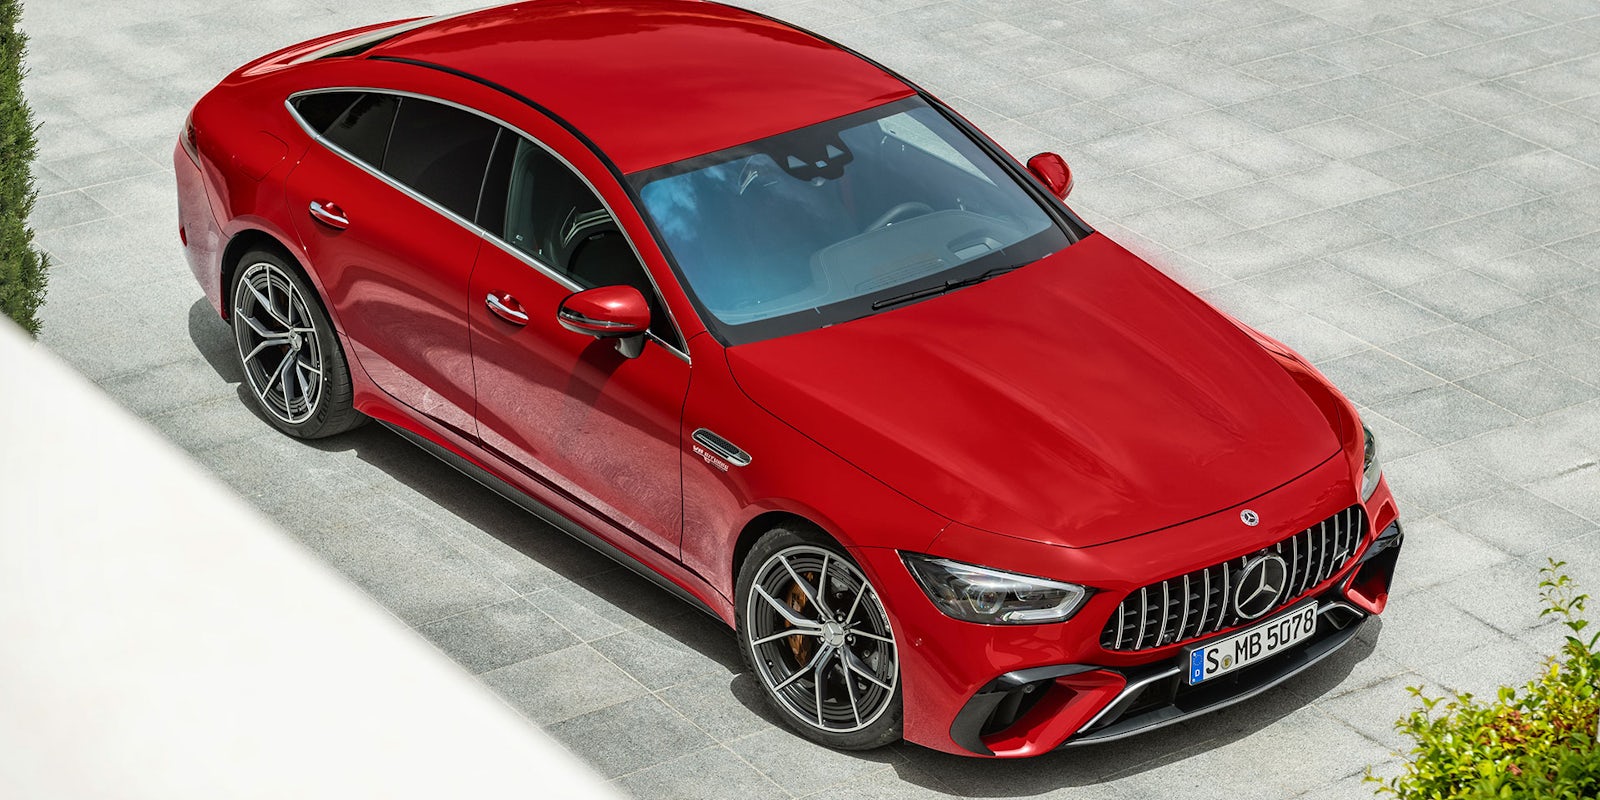 New 843Hp Mercedes-Amg Gt 63 S E Performance Hybrid Revealed: Price, Specs  And Release Date | Carwow